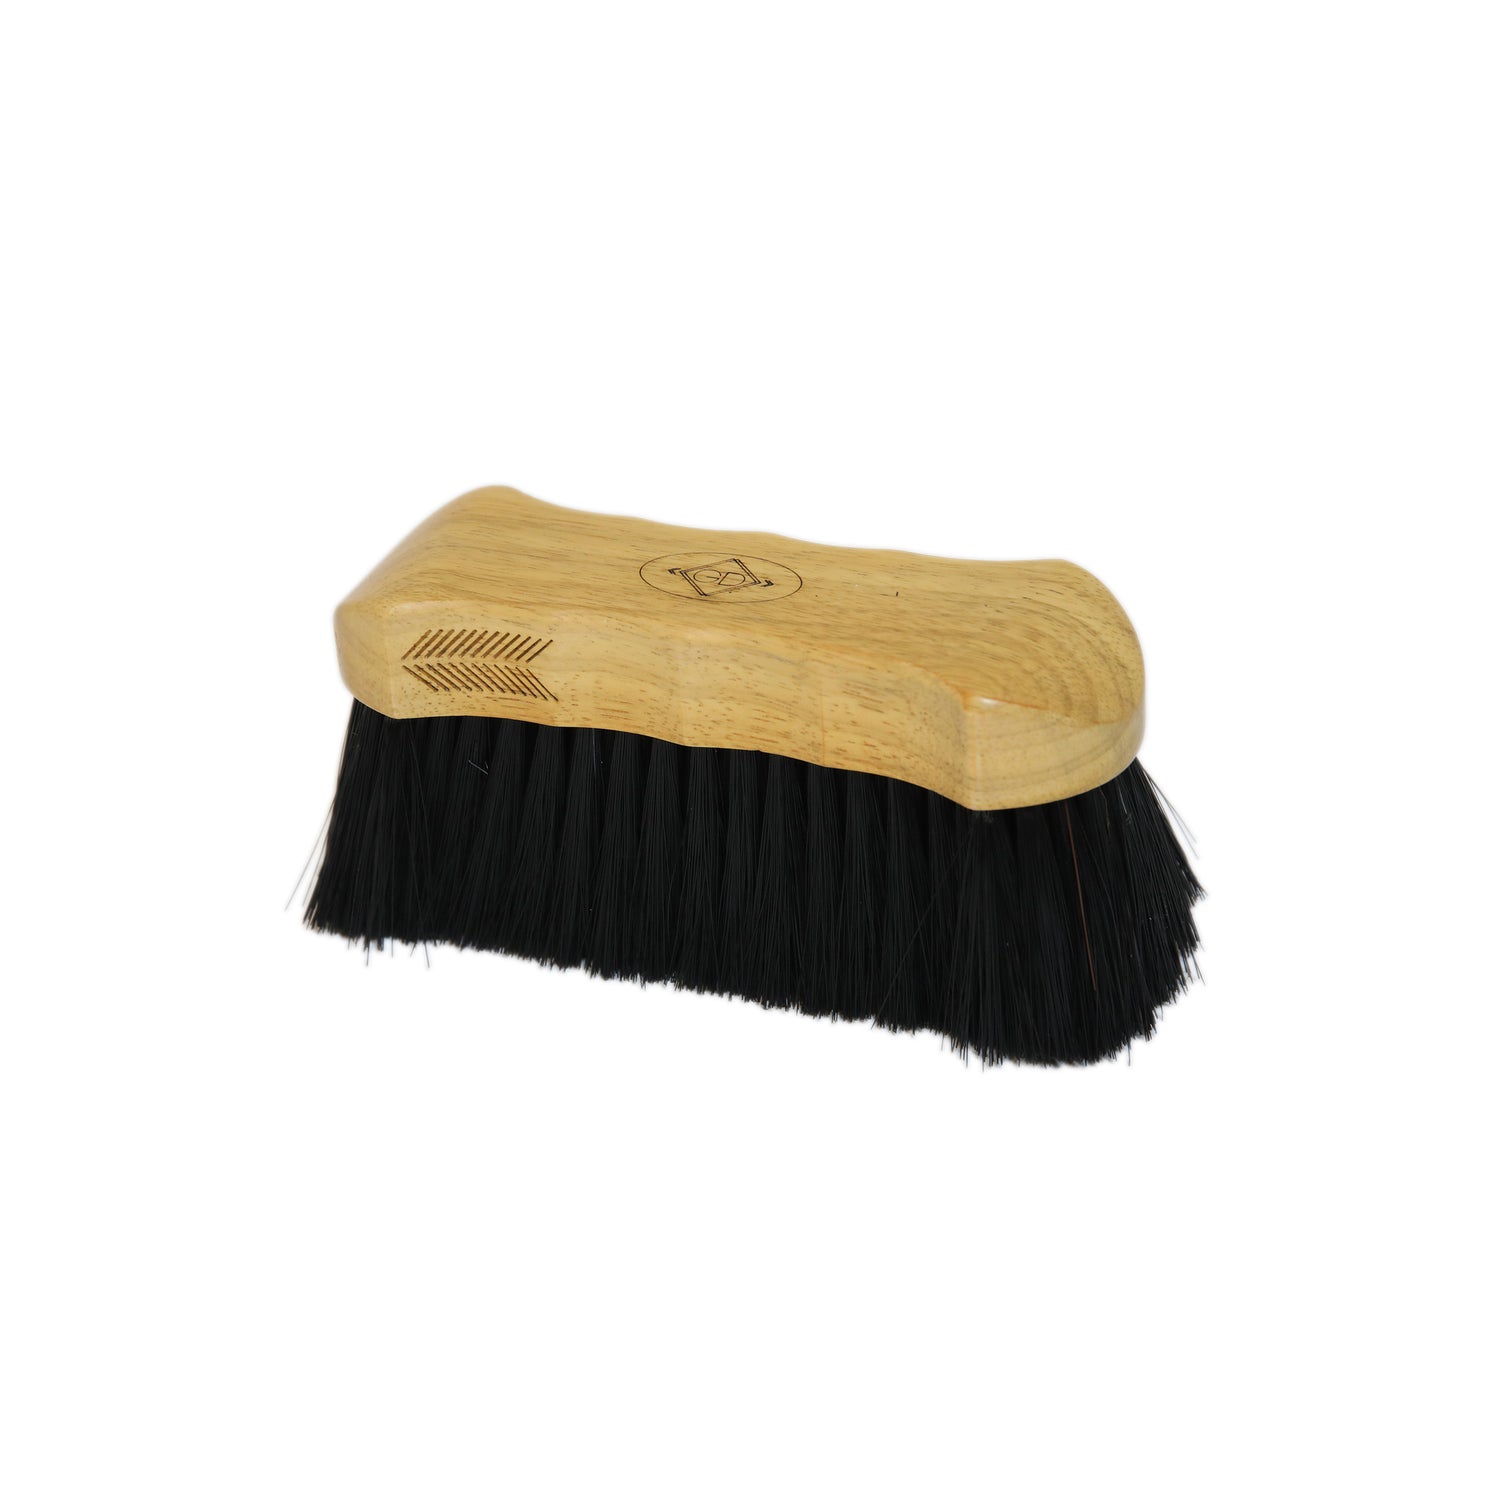 The Kentucky body brush. The outer if the brush is made with brown bristles to help remove the dirt and hairs that has been loosened up. The polypropylene bristles are hard, ideal to use in the winter, when the coat is thicker, or on a muddy horse. The brown bristles in the centre are also smoother, for a better action of the brush. Clean your brush by damping it into soapy warm water and make sure it lasts for a long time.